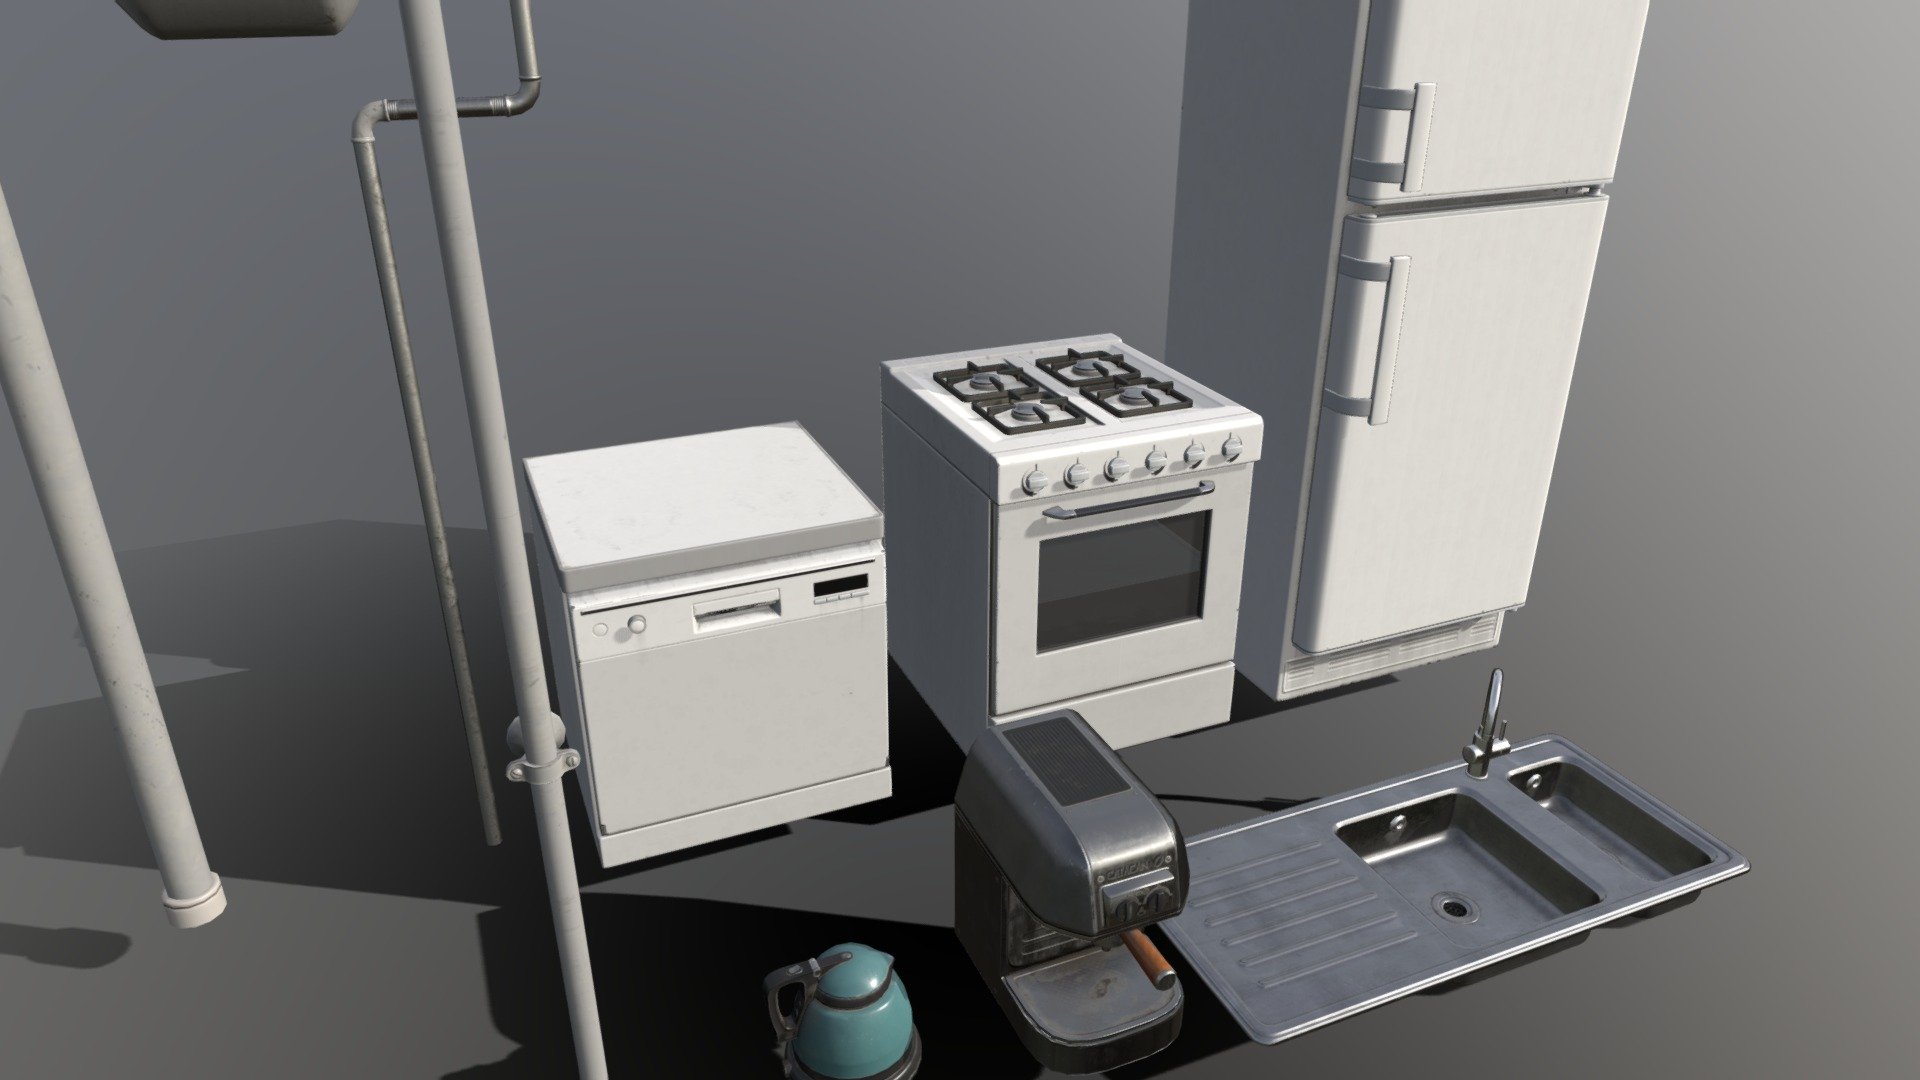 Kitchen appliance assets built for an old personal project. 
Beware that parts of some of the assets are mirrored to save texture space. A second uv-set is used for non-mirrored details (and AO textures etc..)

These are part of a bigger kit. Please see: https://sketchfab.com/nkilstrup/collections/scandinavian-kitchen-kit-7abc790a7c744579801101d9c3655f37 - Kitchen Appliances - Download Free 3D model by Nicolai Kilstrup (@nkilstrup) 3d model